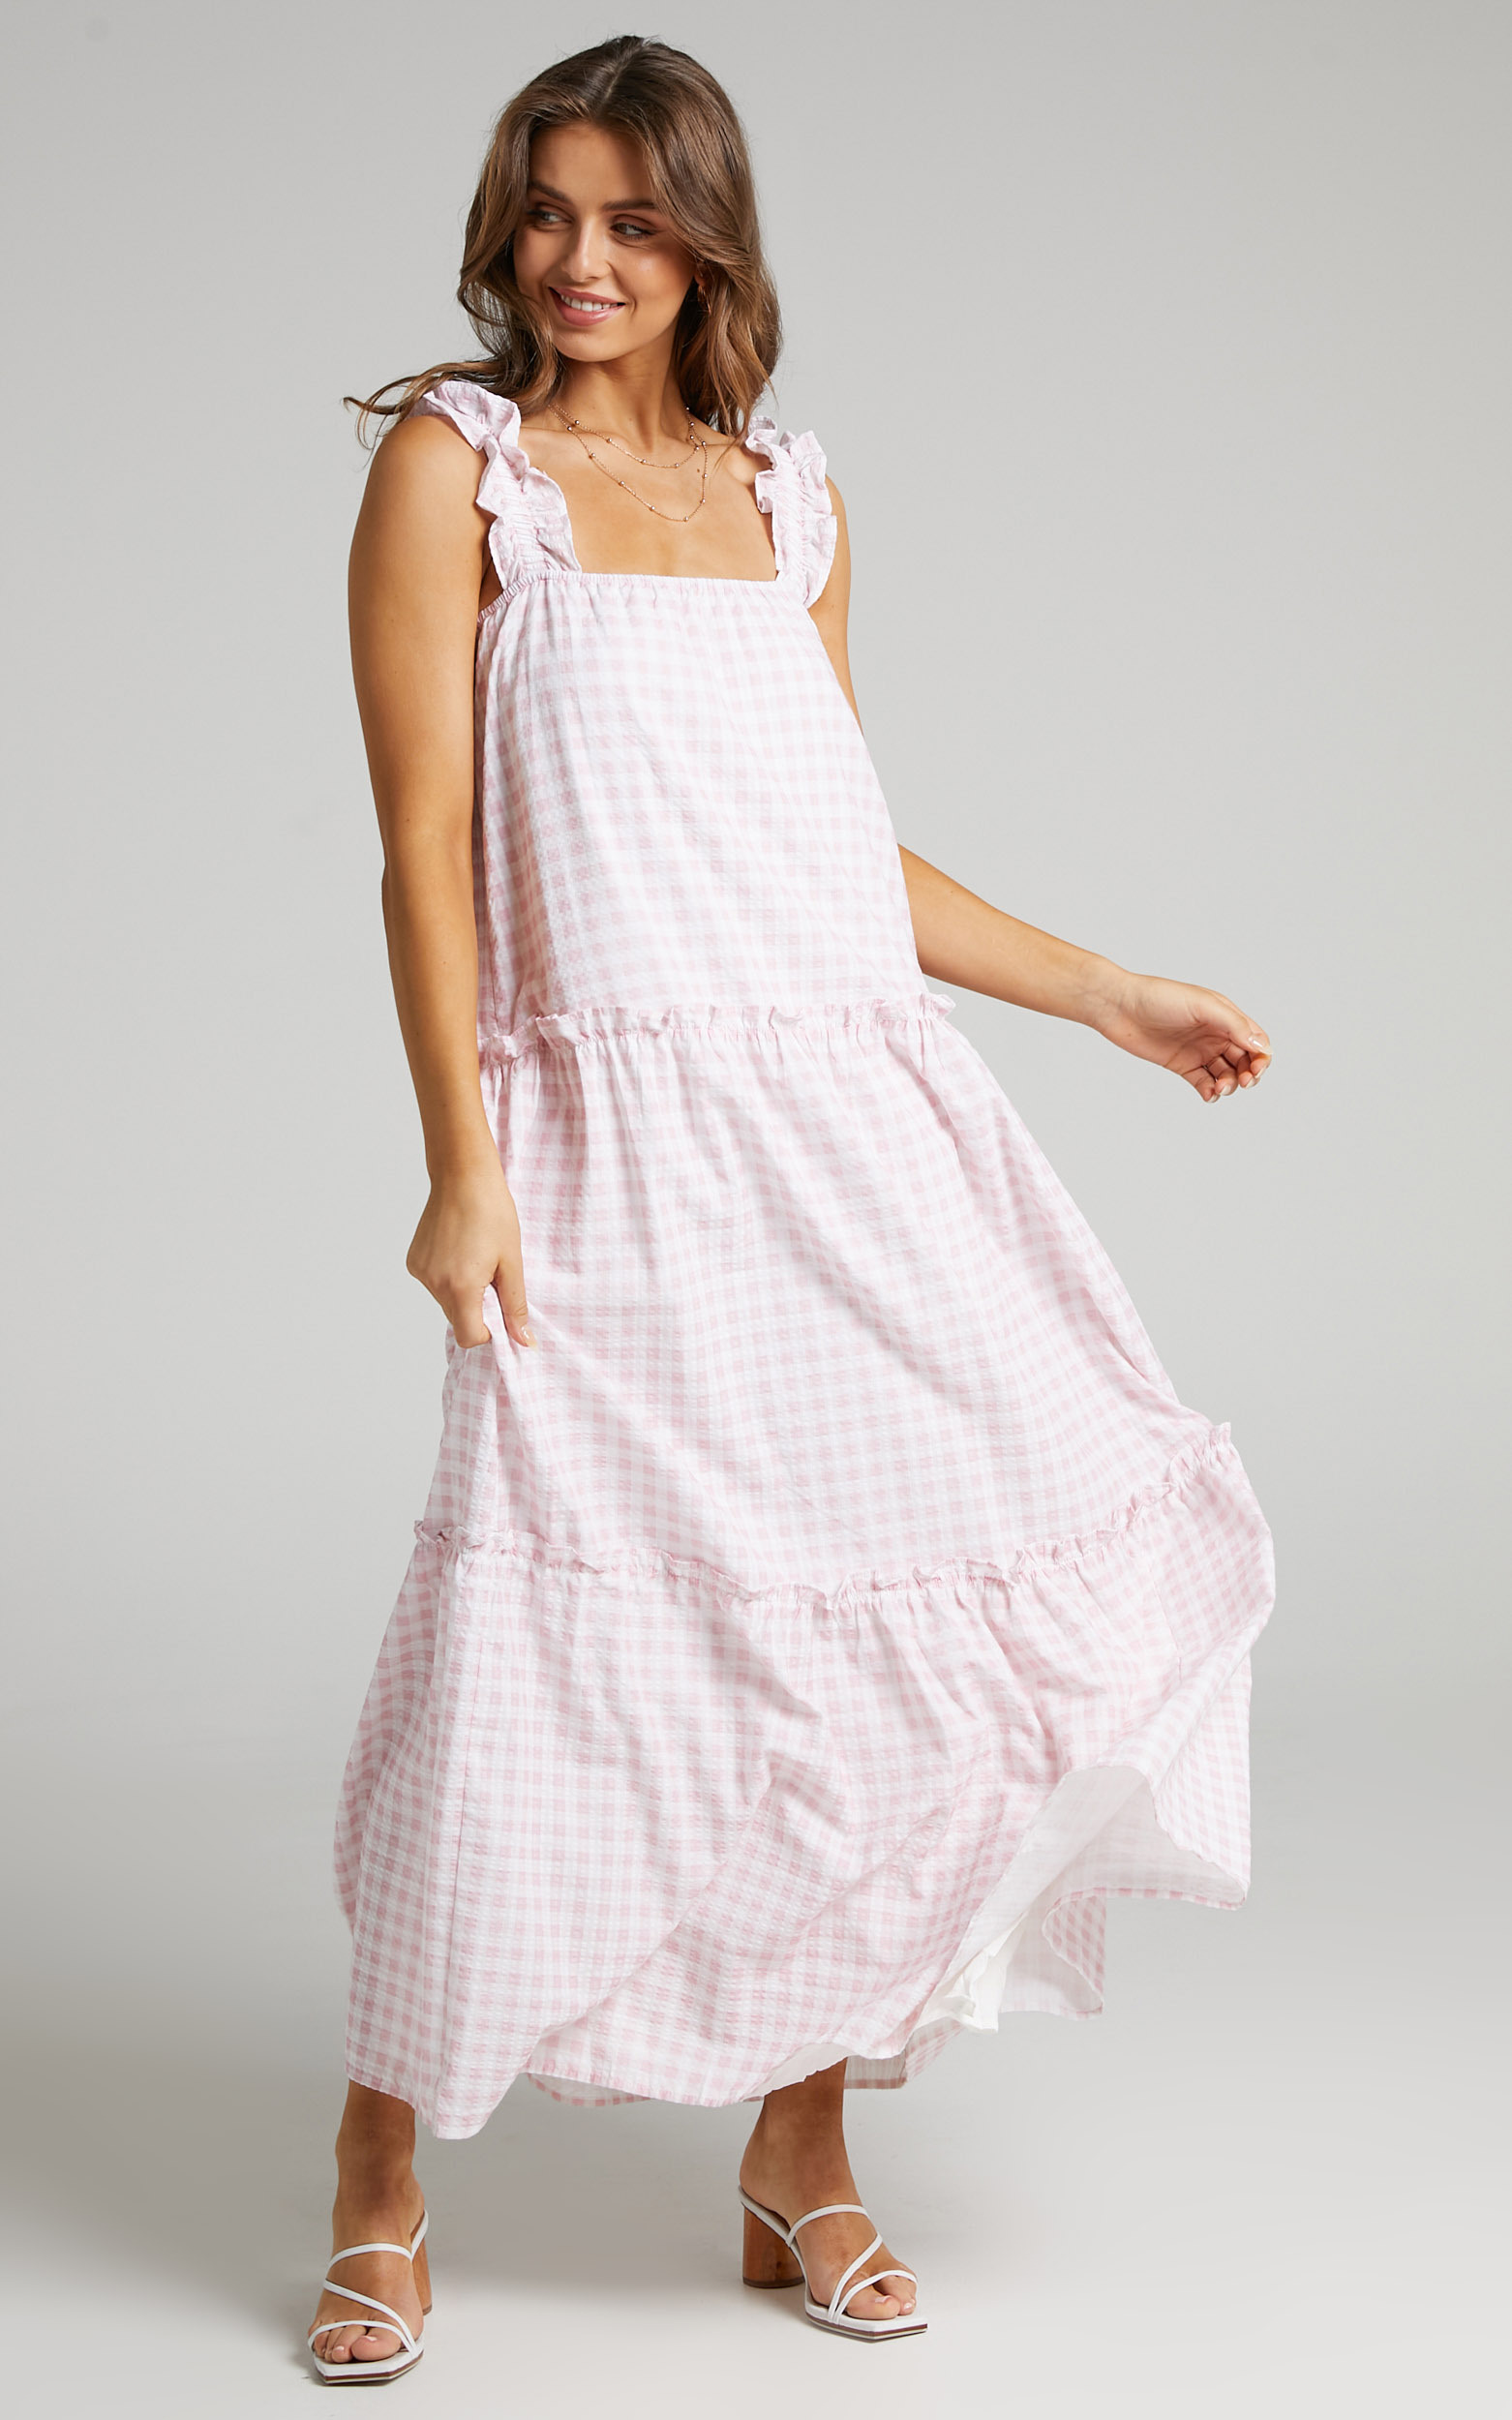 Charlie Holiday - Lottie Maxi Dress in Pink Gingham - L, PNK1, hi-res image number null